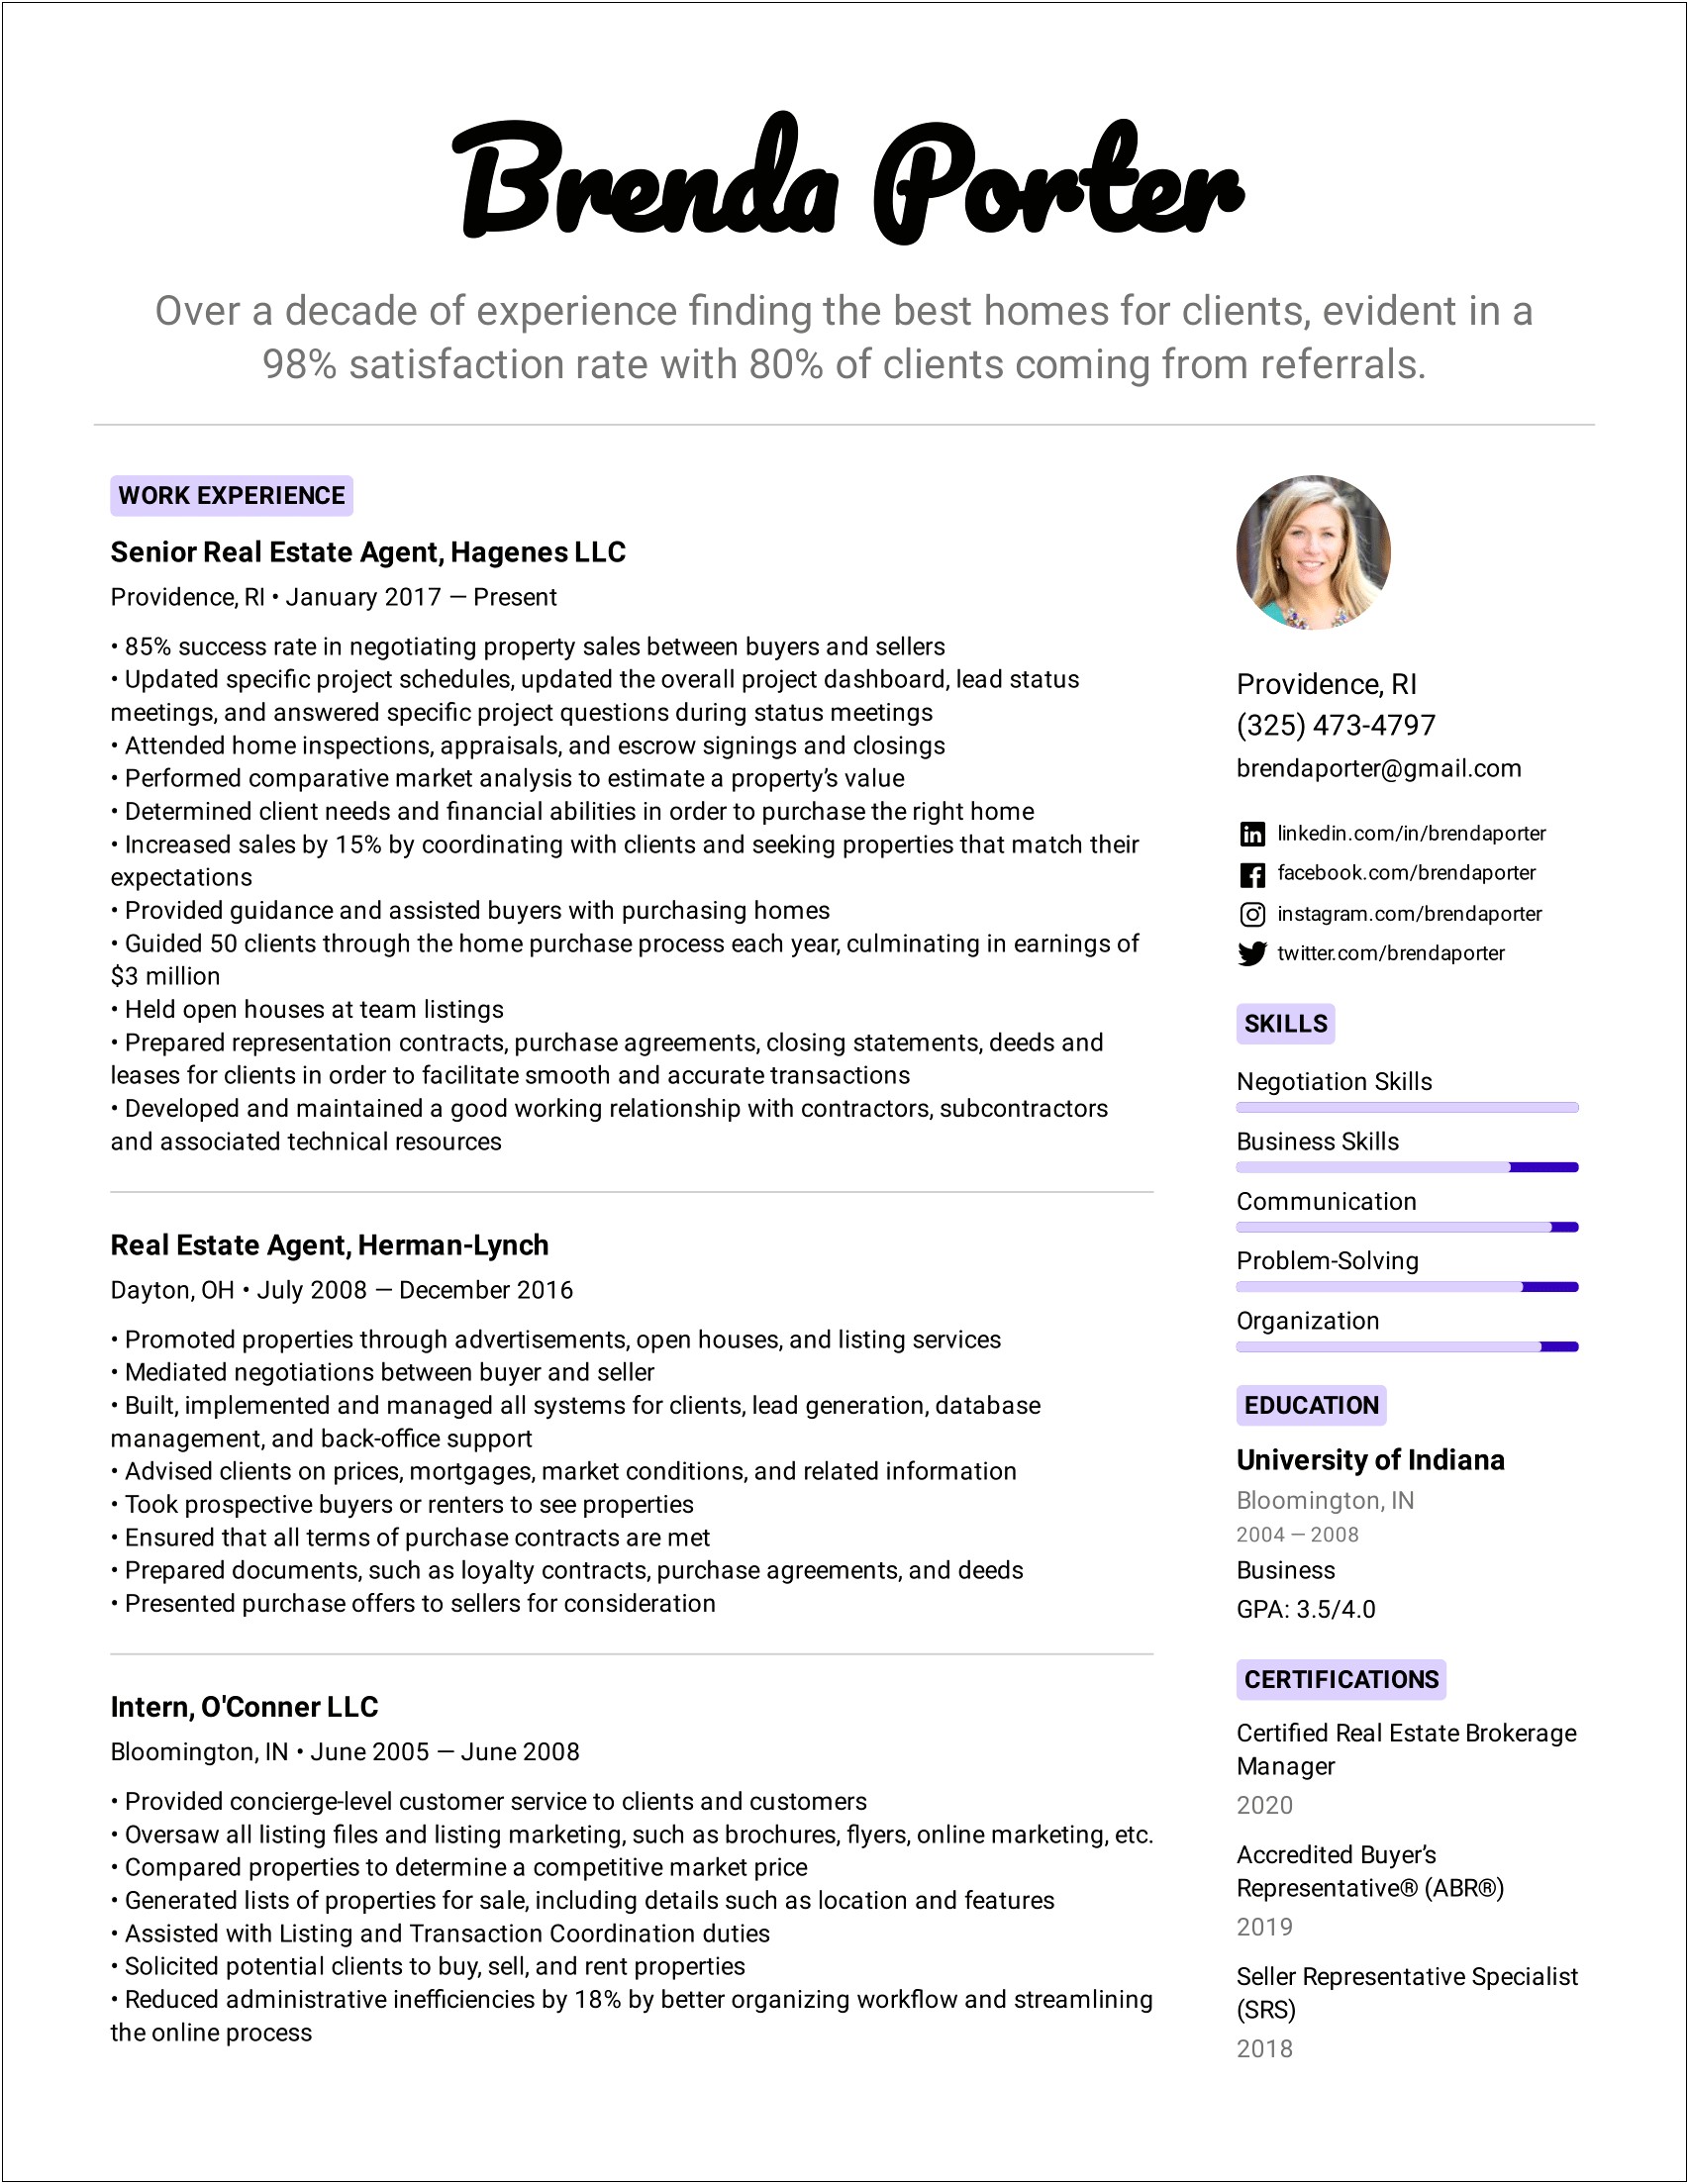 Administrative Assistant Real Estate Resume Example